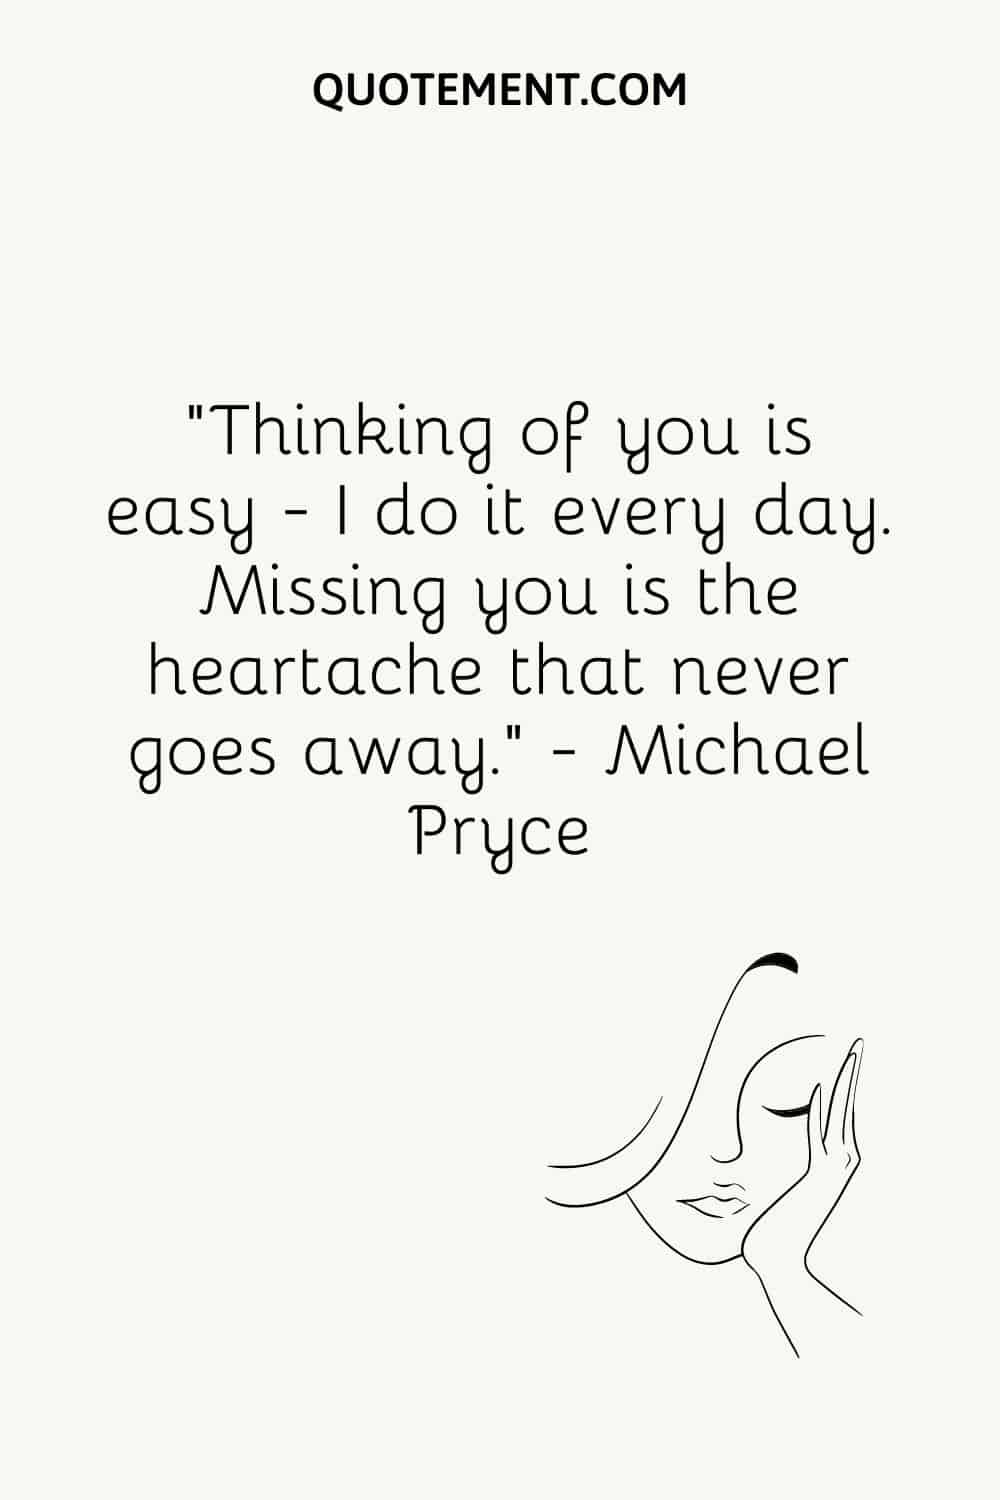 girl with closed eyes image representing thinking of you quote